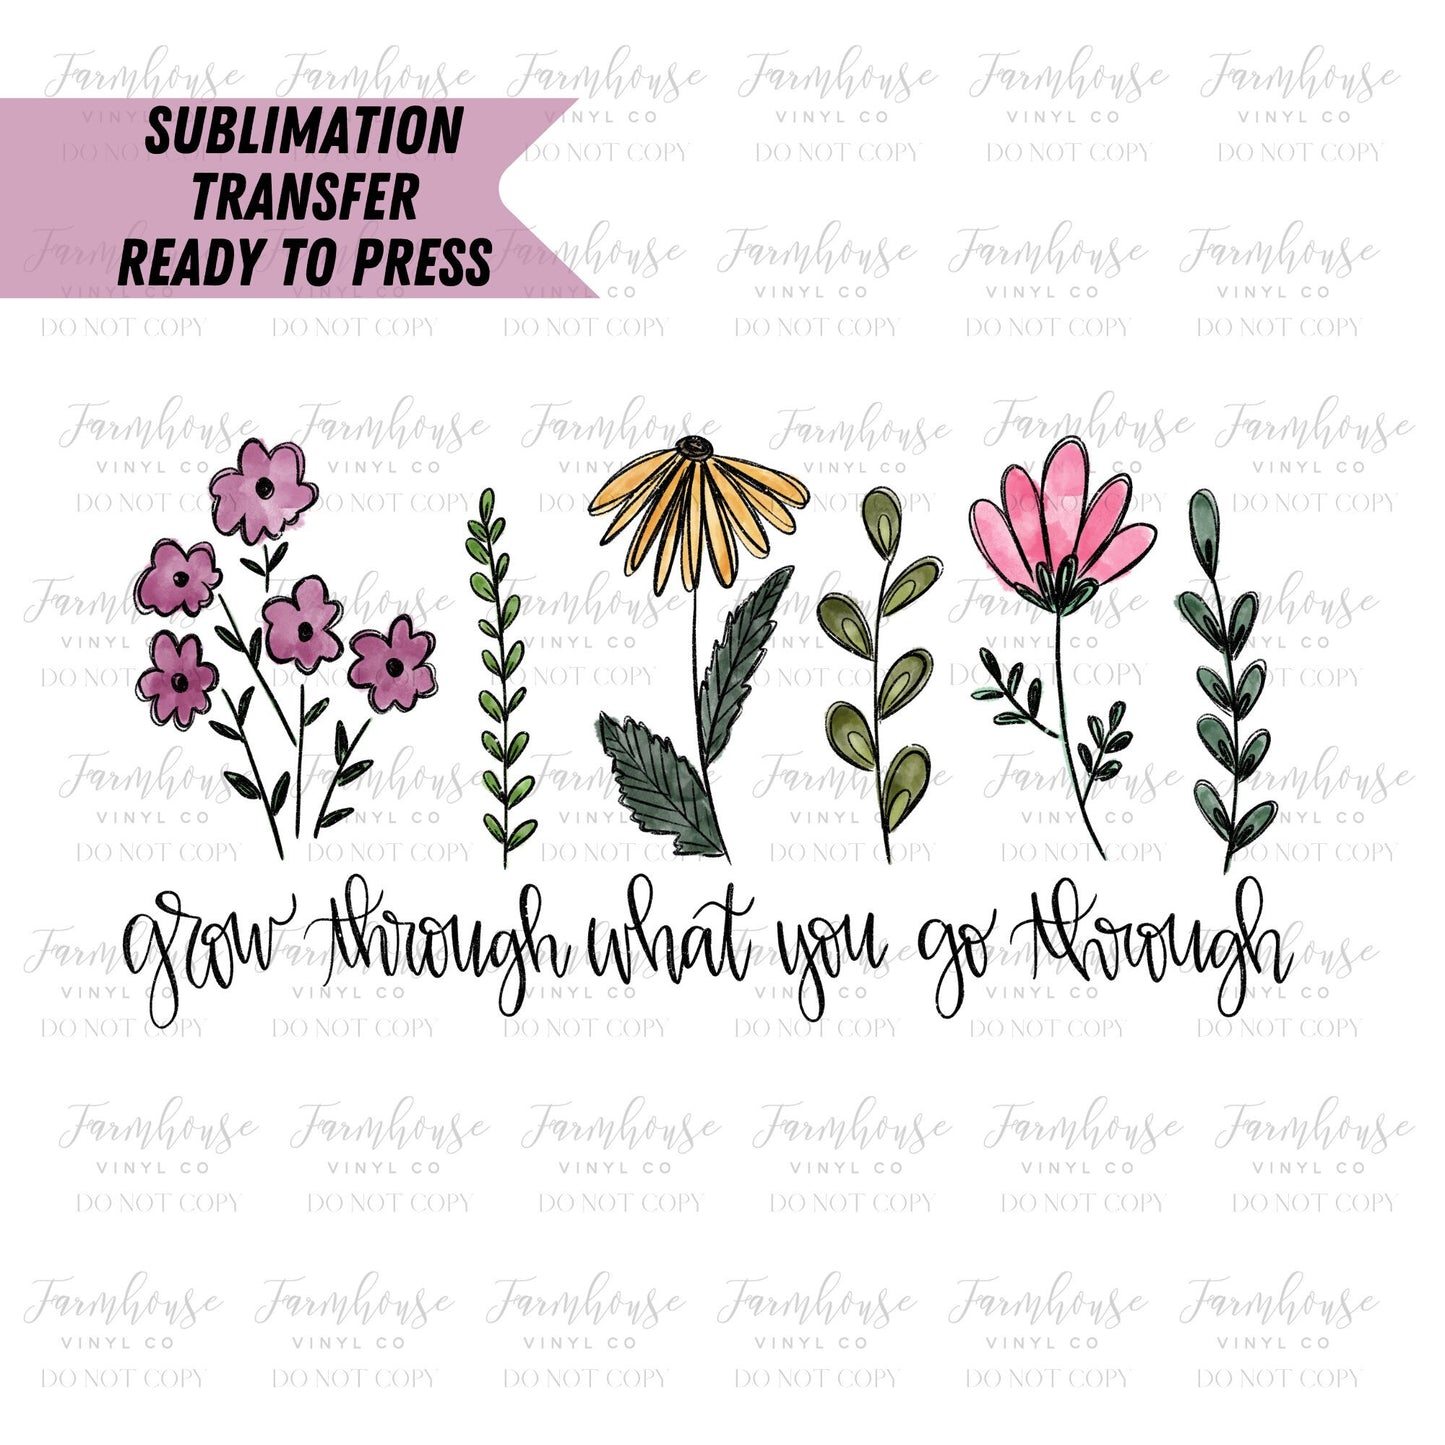 Grow Through What You Go Through, Floral Spring Positive Quote, Ready To Press, Sublimation Transfers, Sublimation, Transfer Ready To Press - Farmhouse Vinyl Co